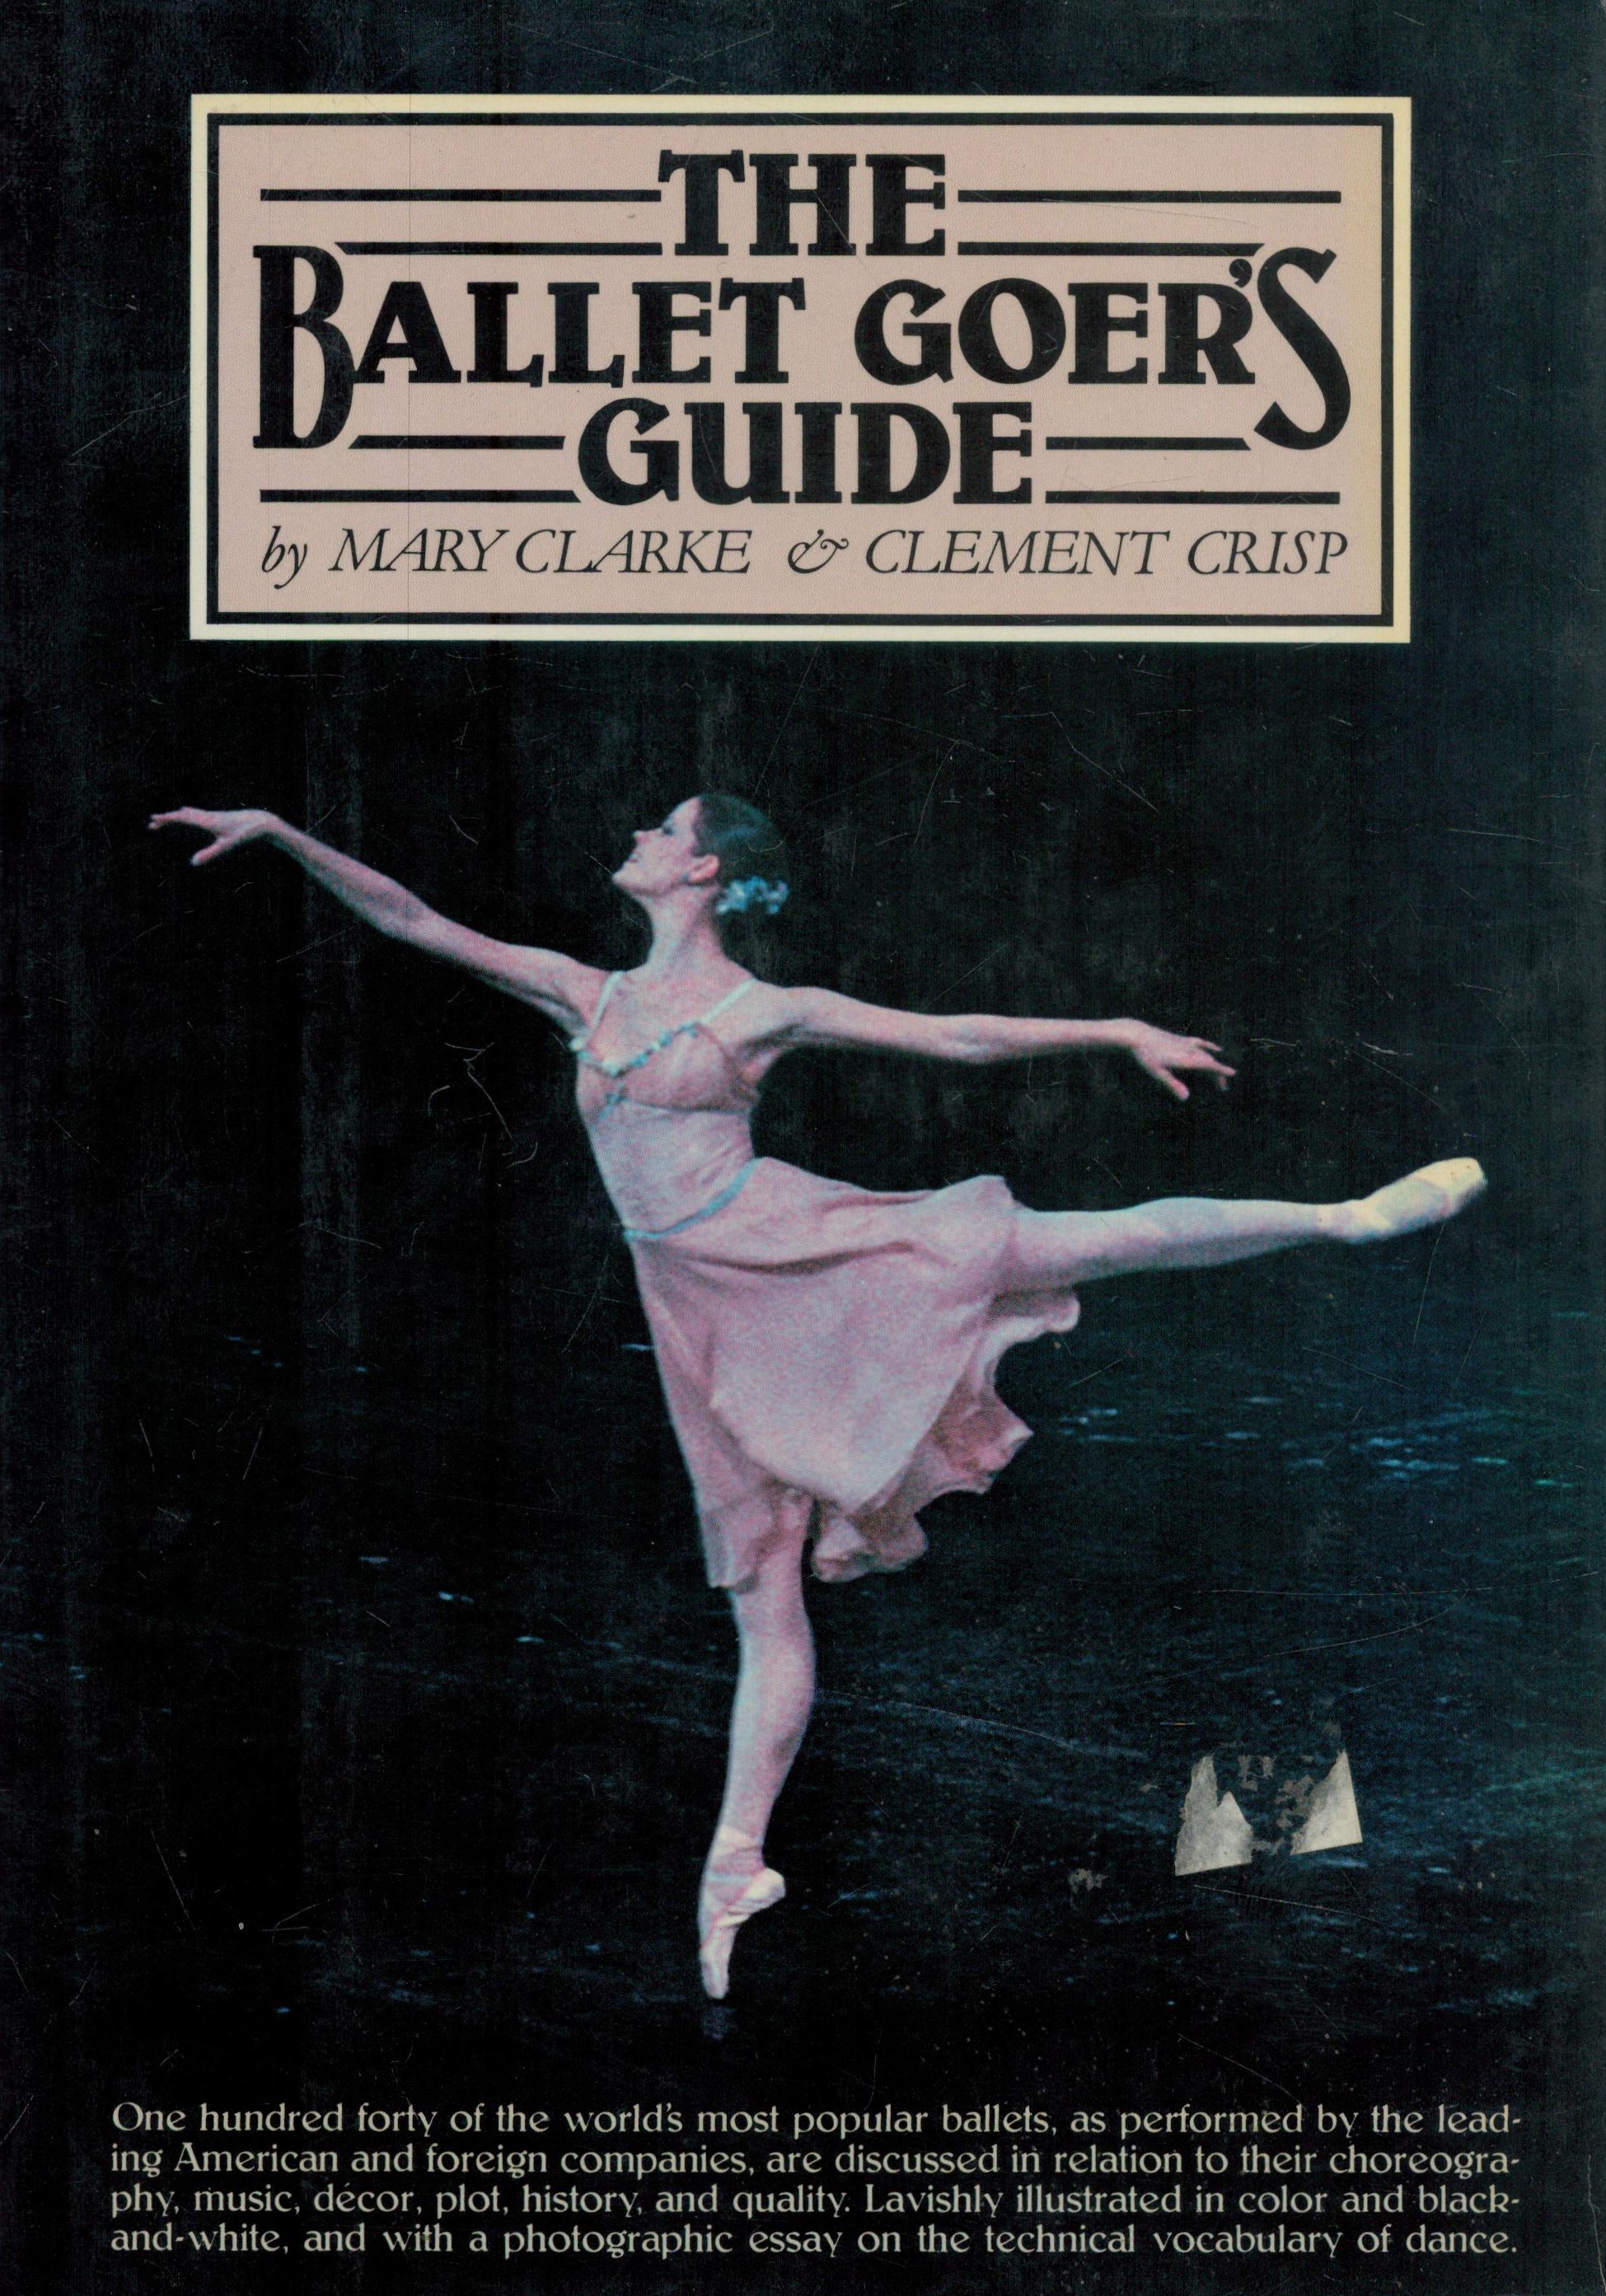 The Ballet Goer's Guide by Mary Clarke & Clement Crisp 1981 hardback book with 367 pages, some early